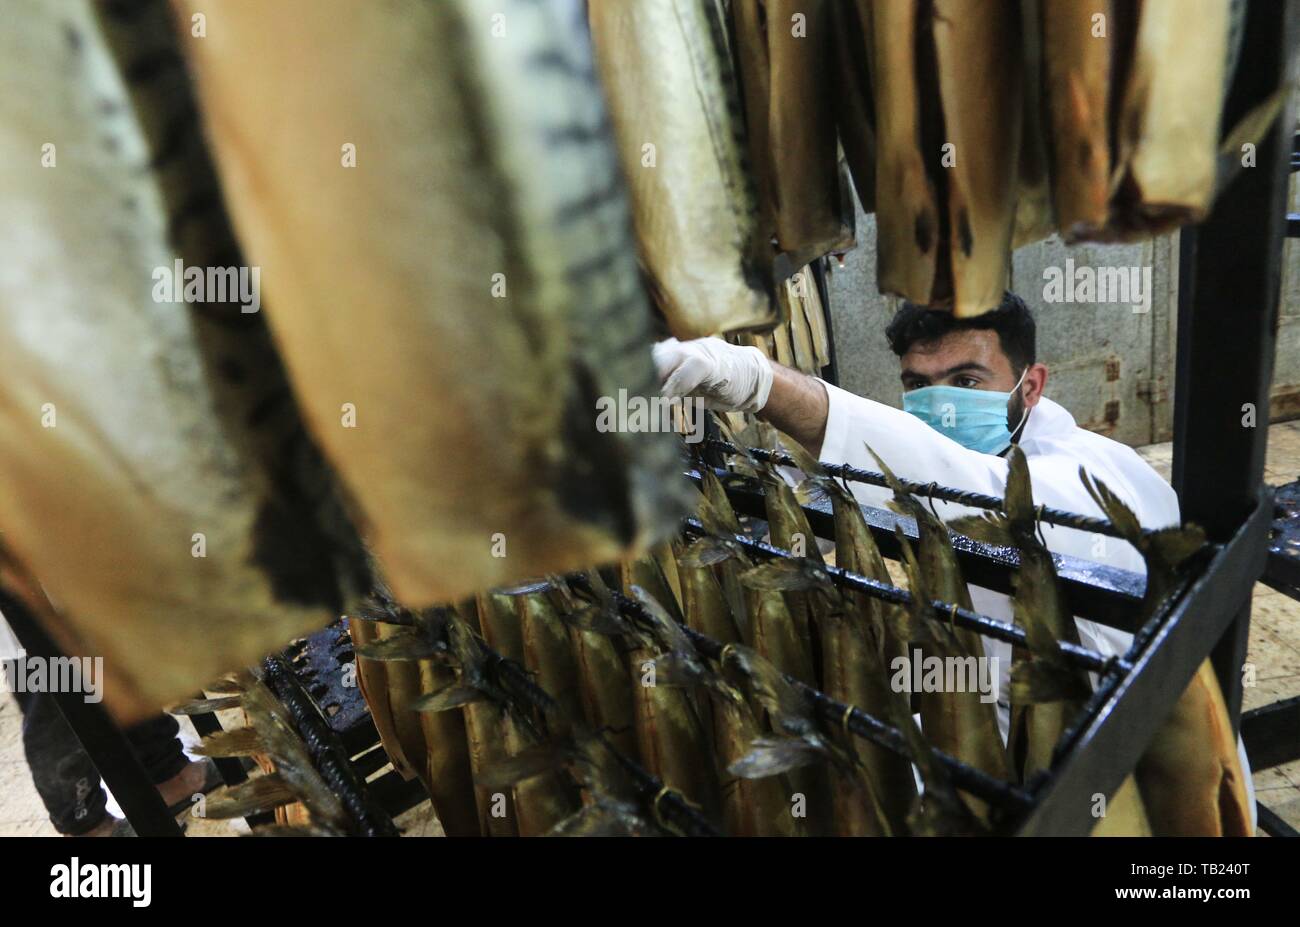 Rafah, The Gaza Strip, Palestine. 28th May, 2019. Palestinian workers prepare mackerel for smoking before selling for Eid al-Fitr holiday, which marks the end of the Muslim fasting month of Ramadan, in Rafah refugee camp, southern Gaza Strip, 28May 2019. Muslims around the world celebrate the holy month of Ramadan by praying during the night time and fasting between sunrise and sunset Credit: Mahmoud Khattab/Quds Net News/ZUMA Wire/Alamy Live News Stock Photo